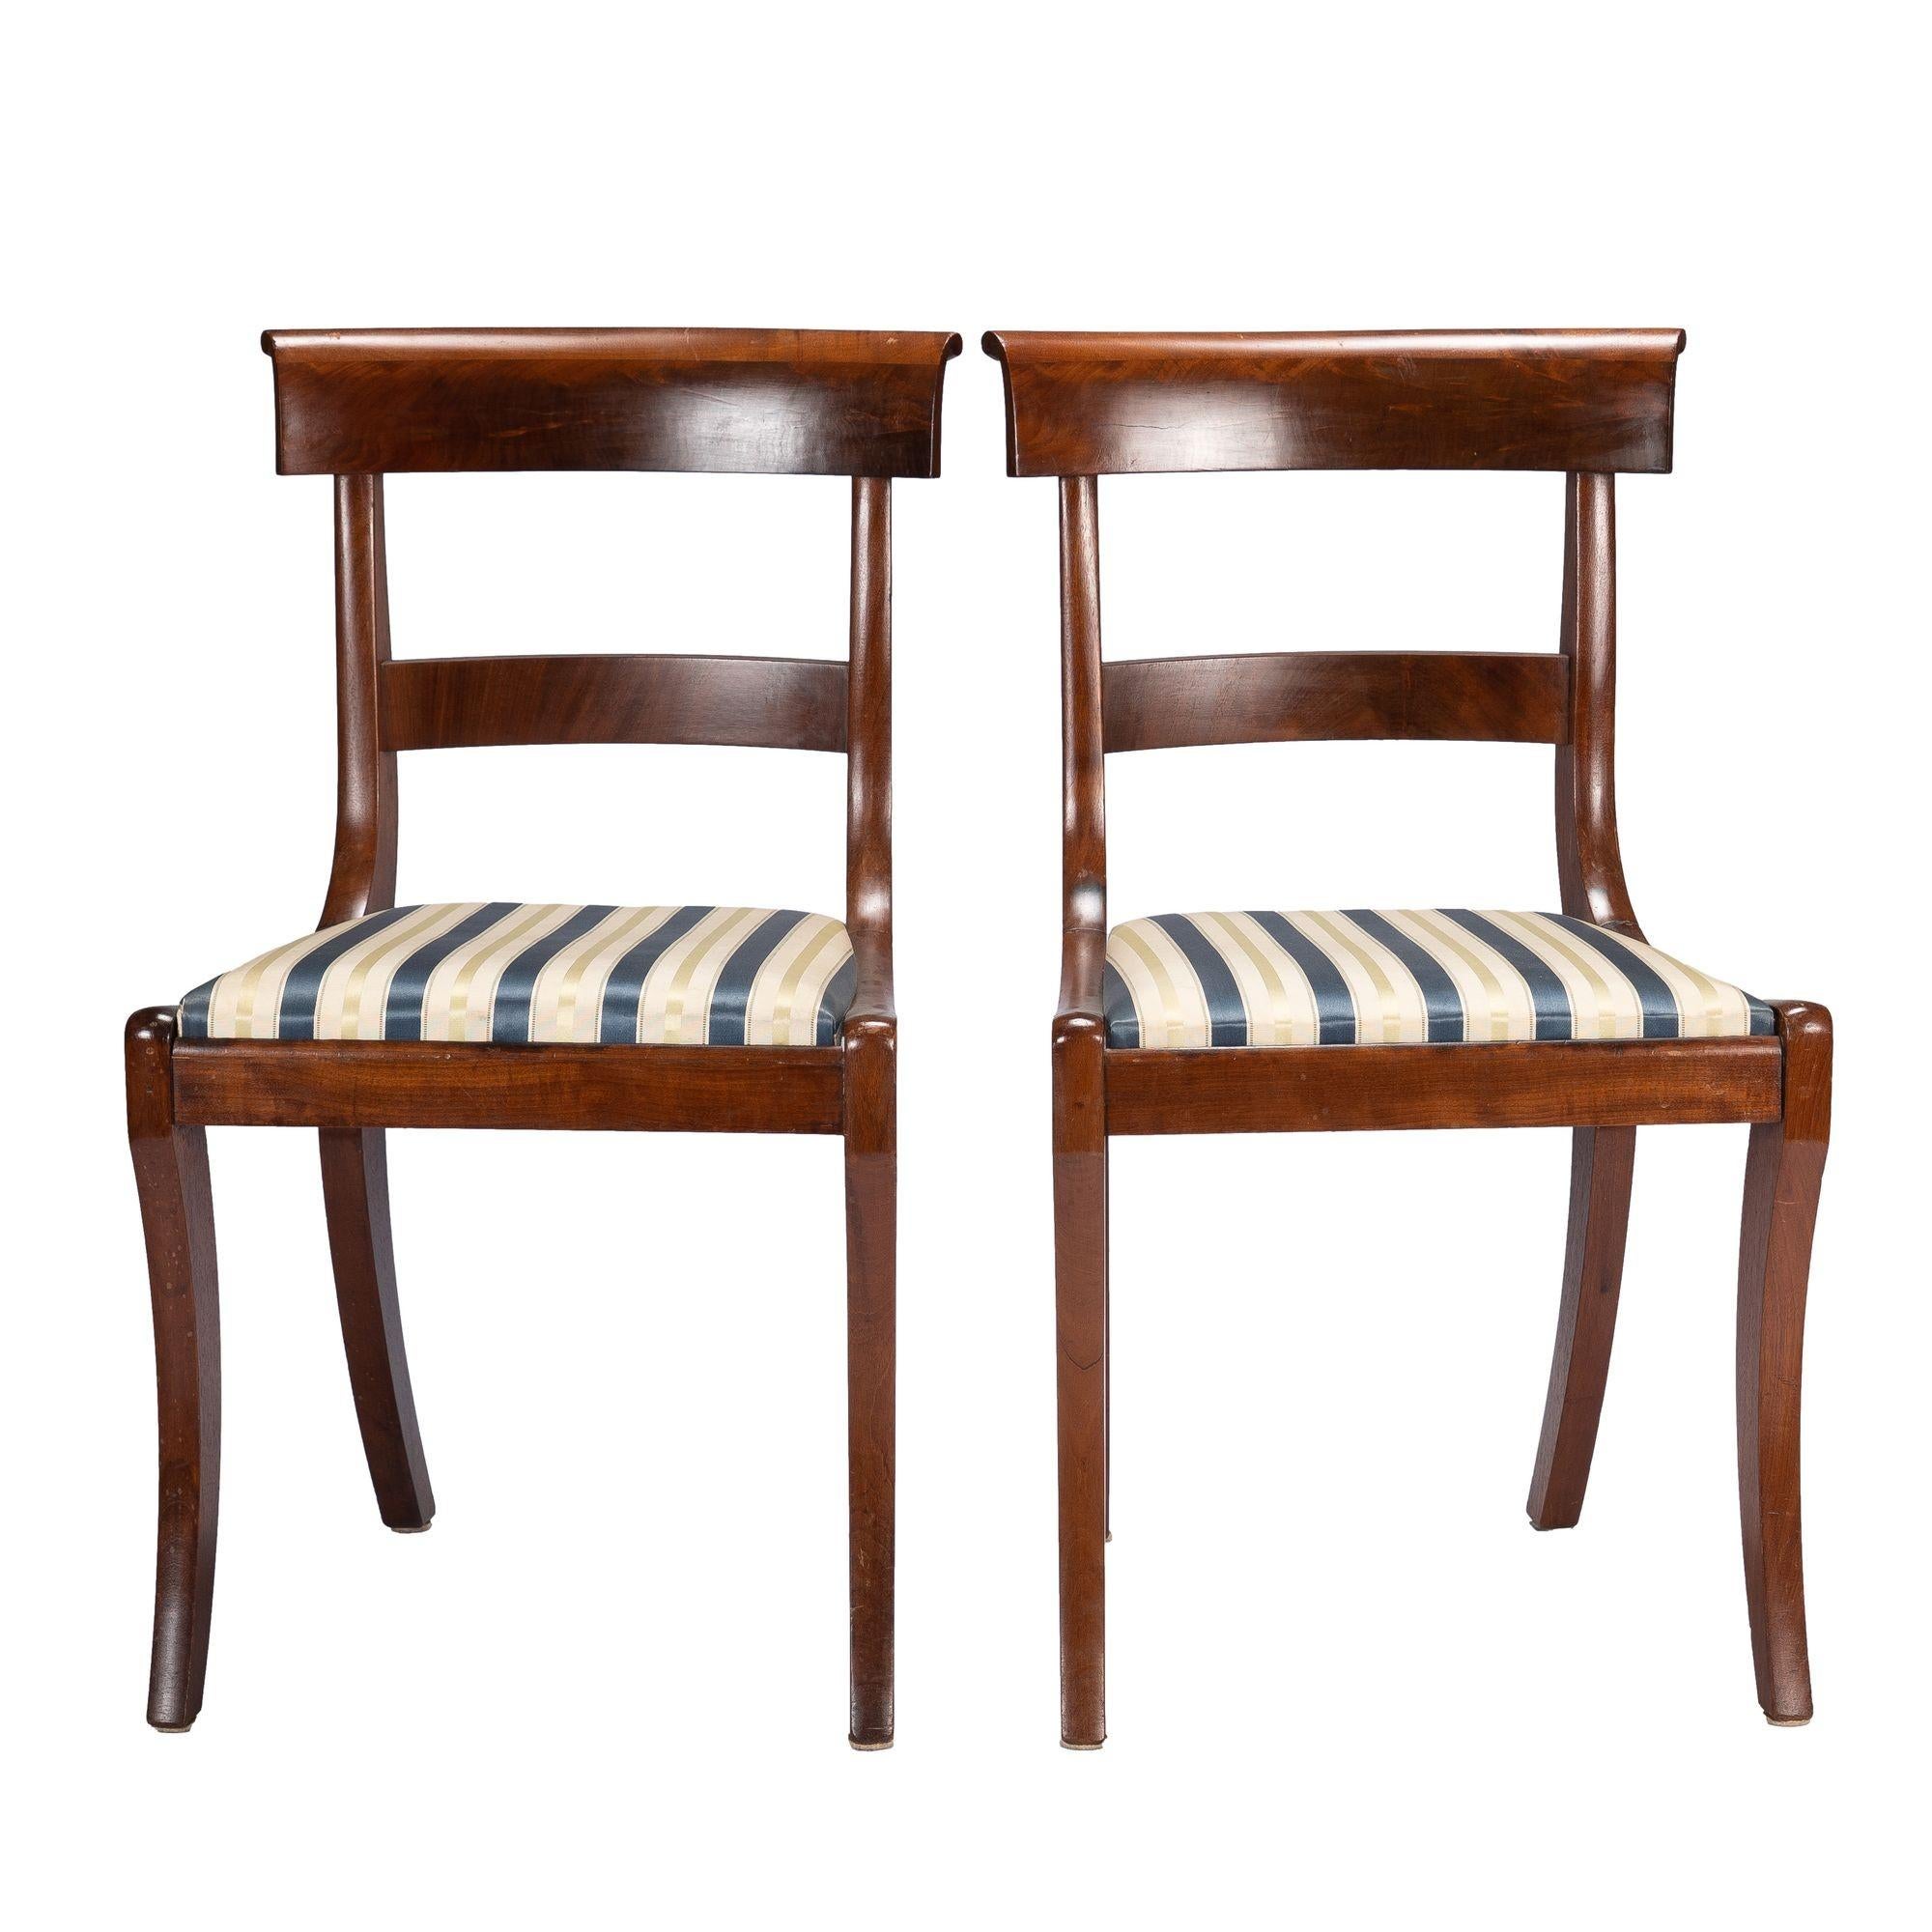 American Classical Pair of New York mahogany Klismos slip seat side chairs, 1825 For Sale